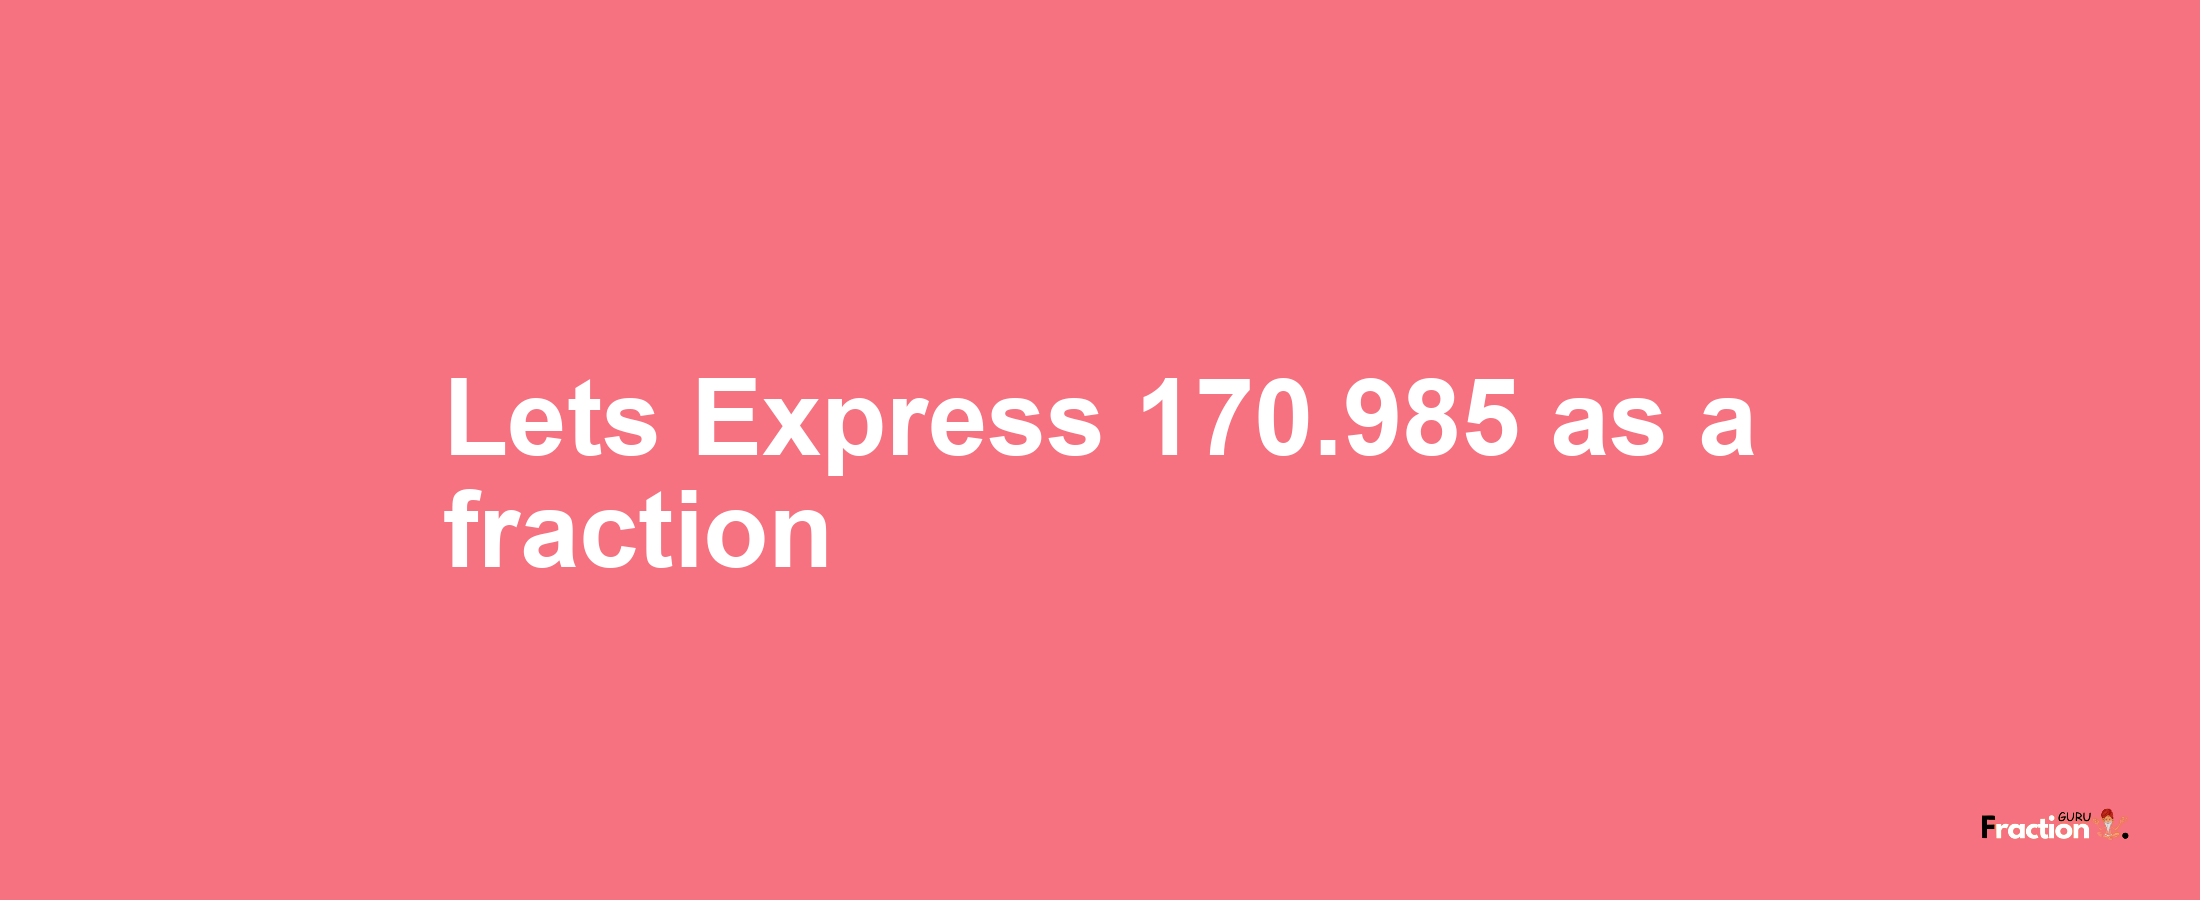 Lets Express 170.985 as afraction